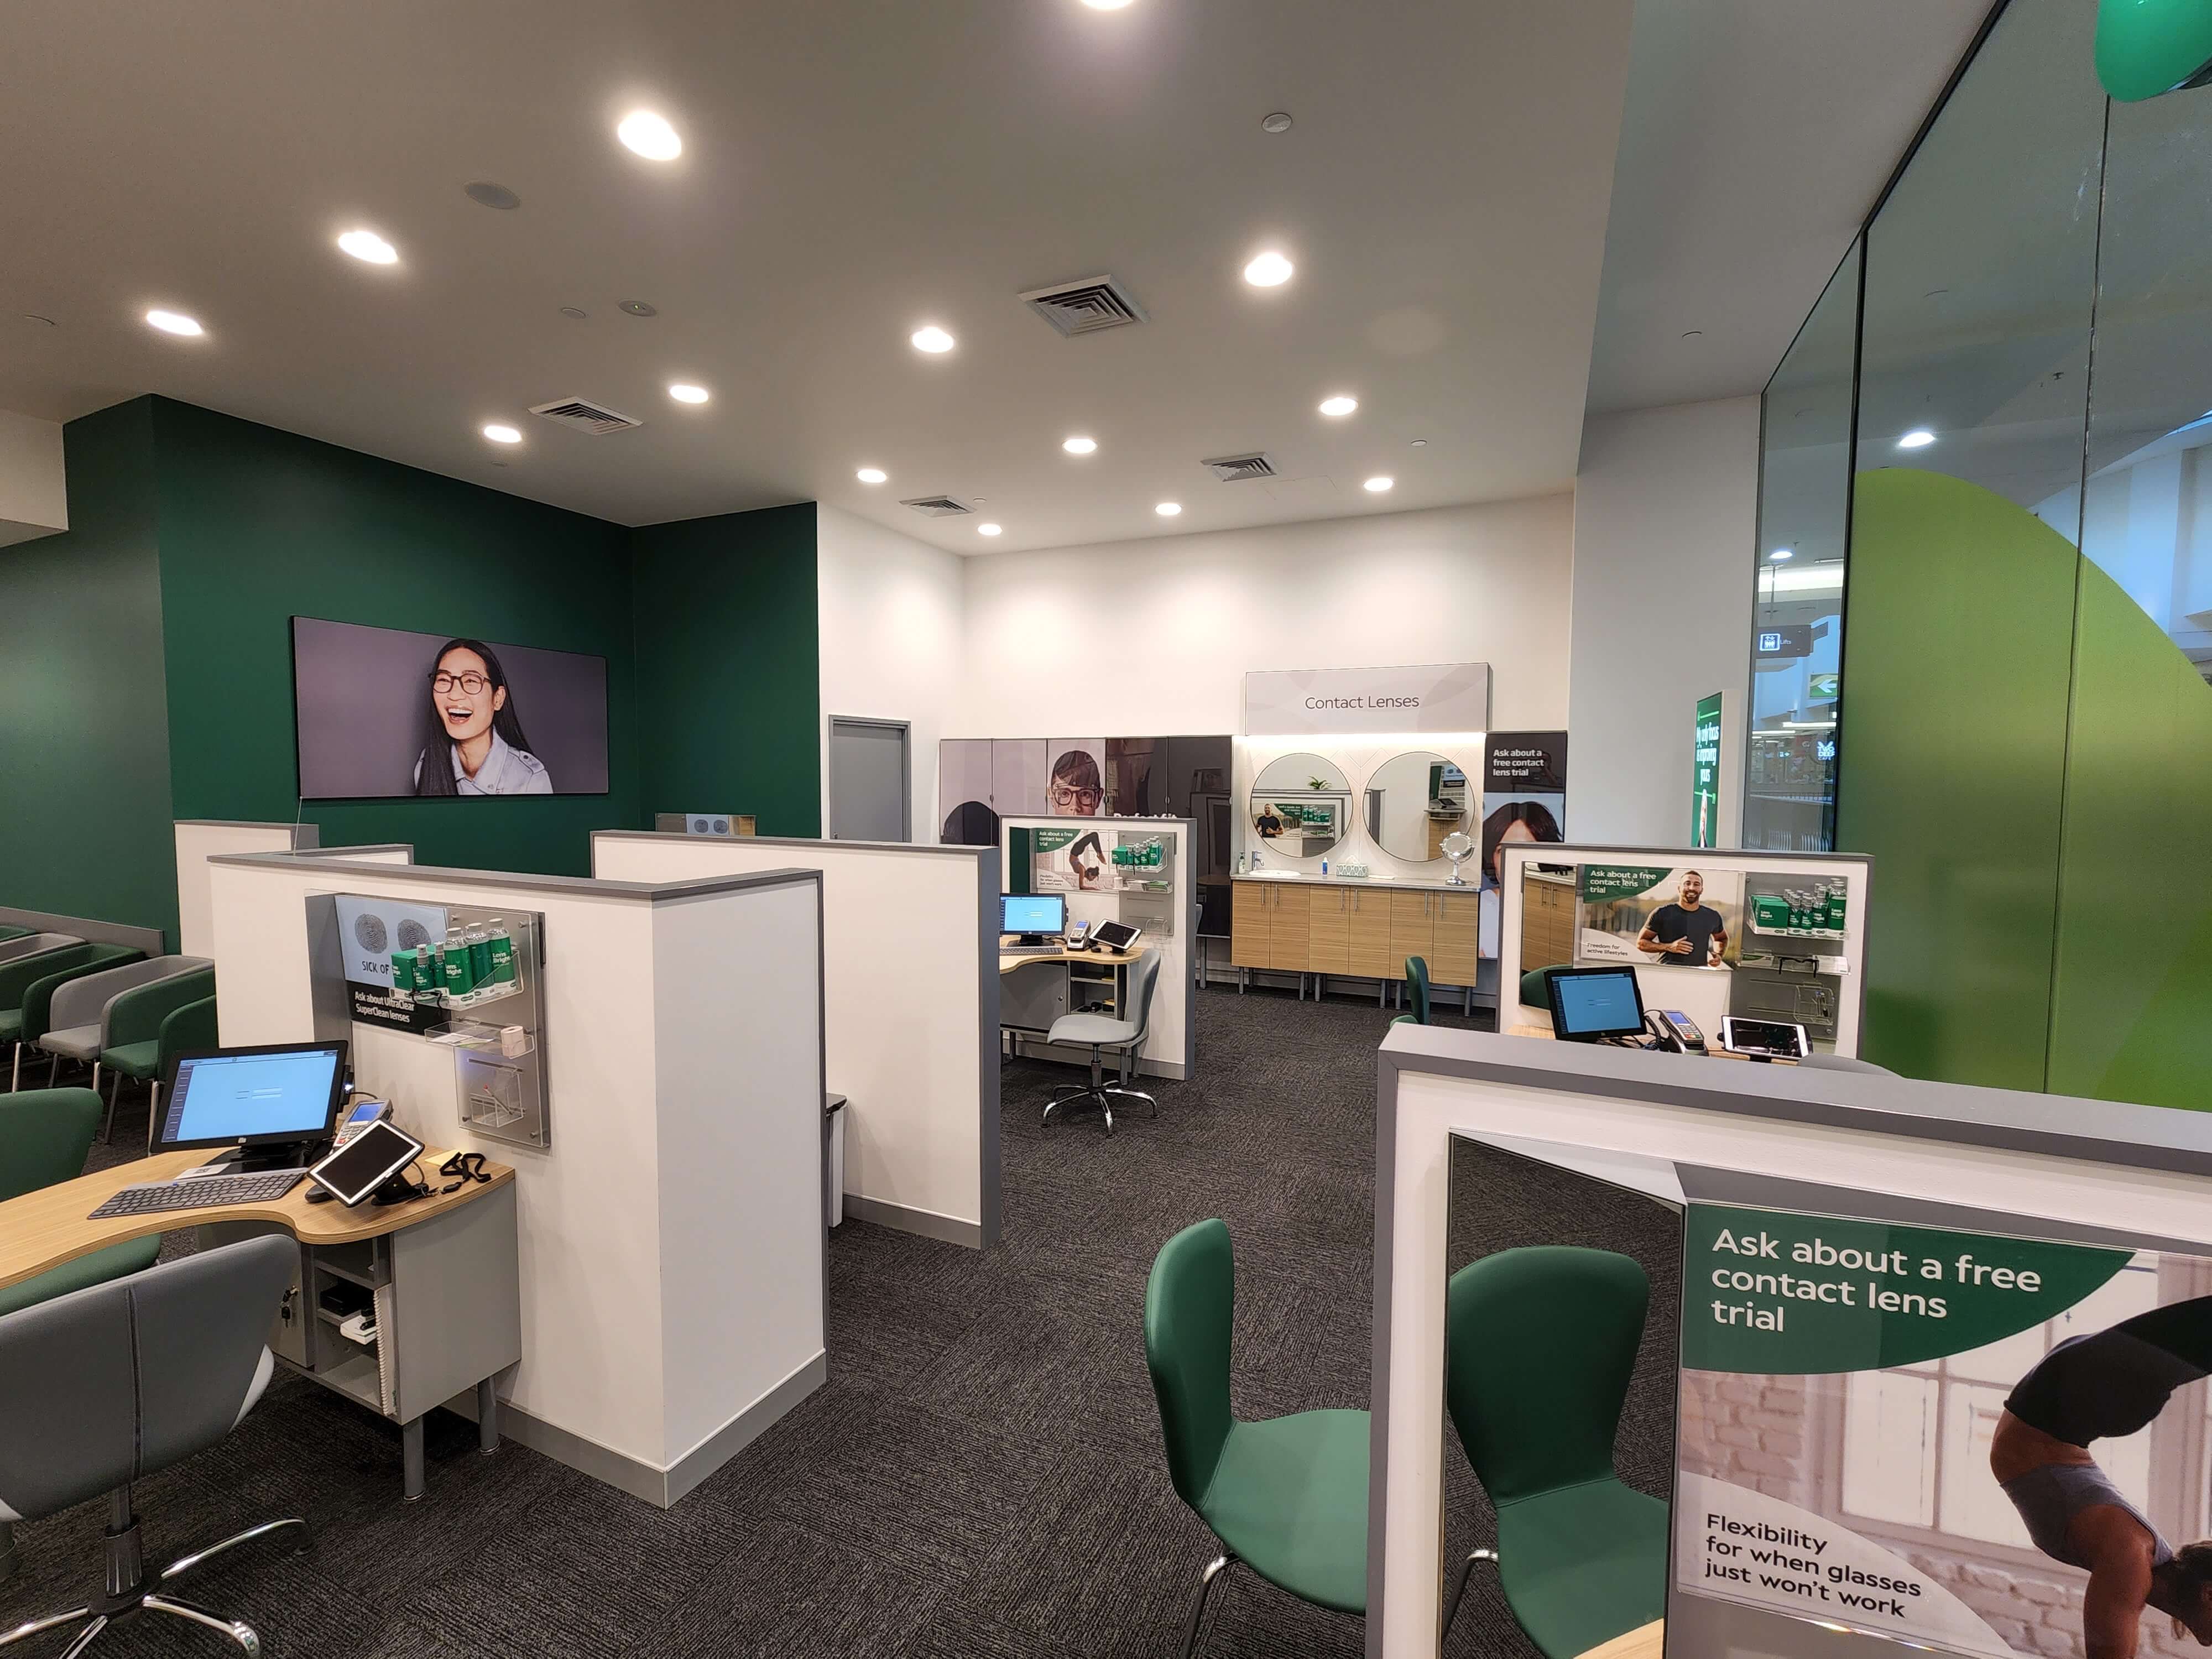 Images Specsavers Optometrists & Audiology - Burwood Westfield